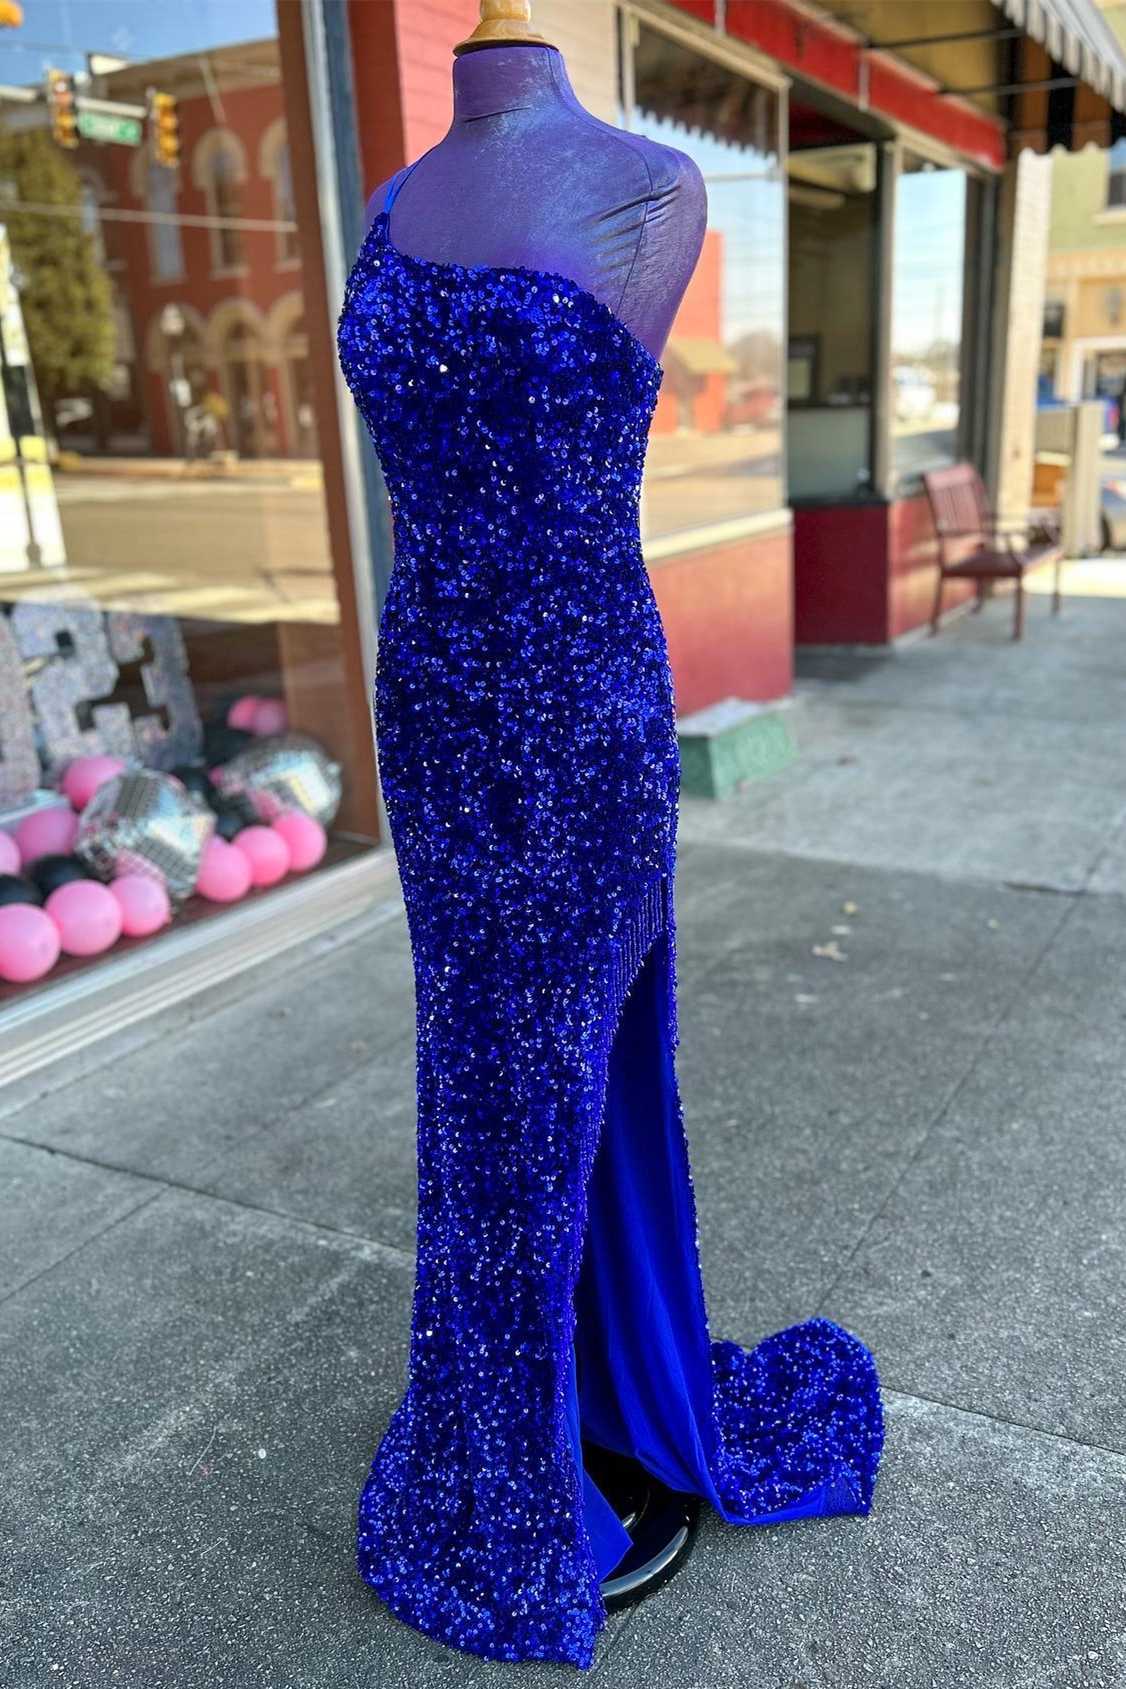 Royal Blue Sequin One-Shoulder Backless Long Corset Prom Dresses with Slit,Evening Party Dress Outfits, Rustic Wedding Dress